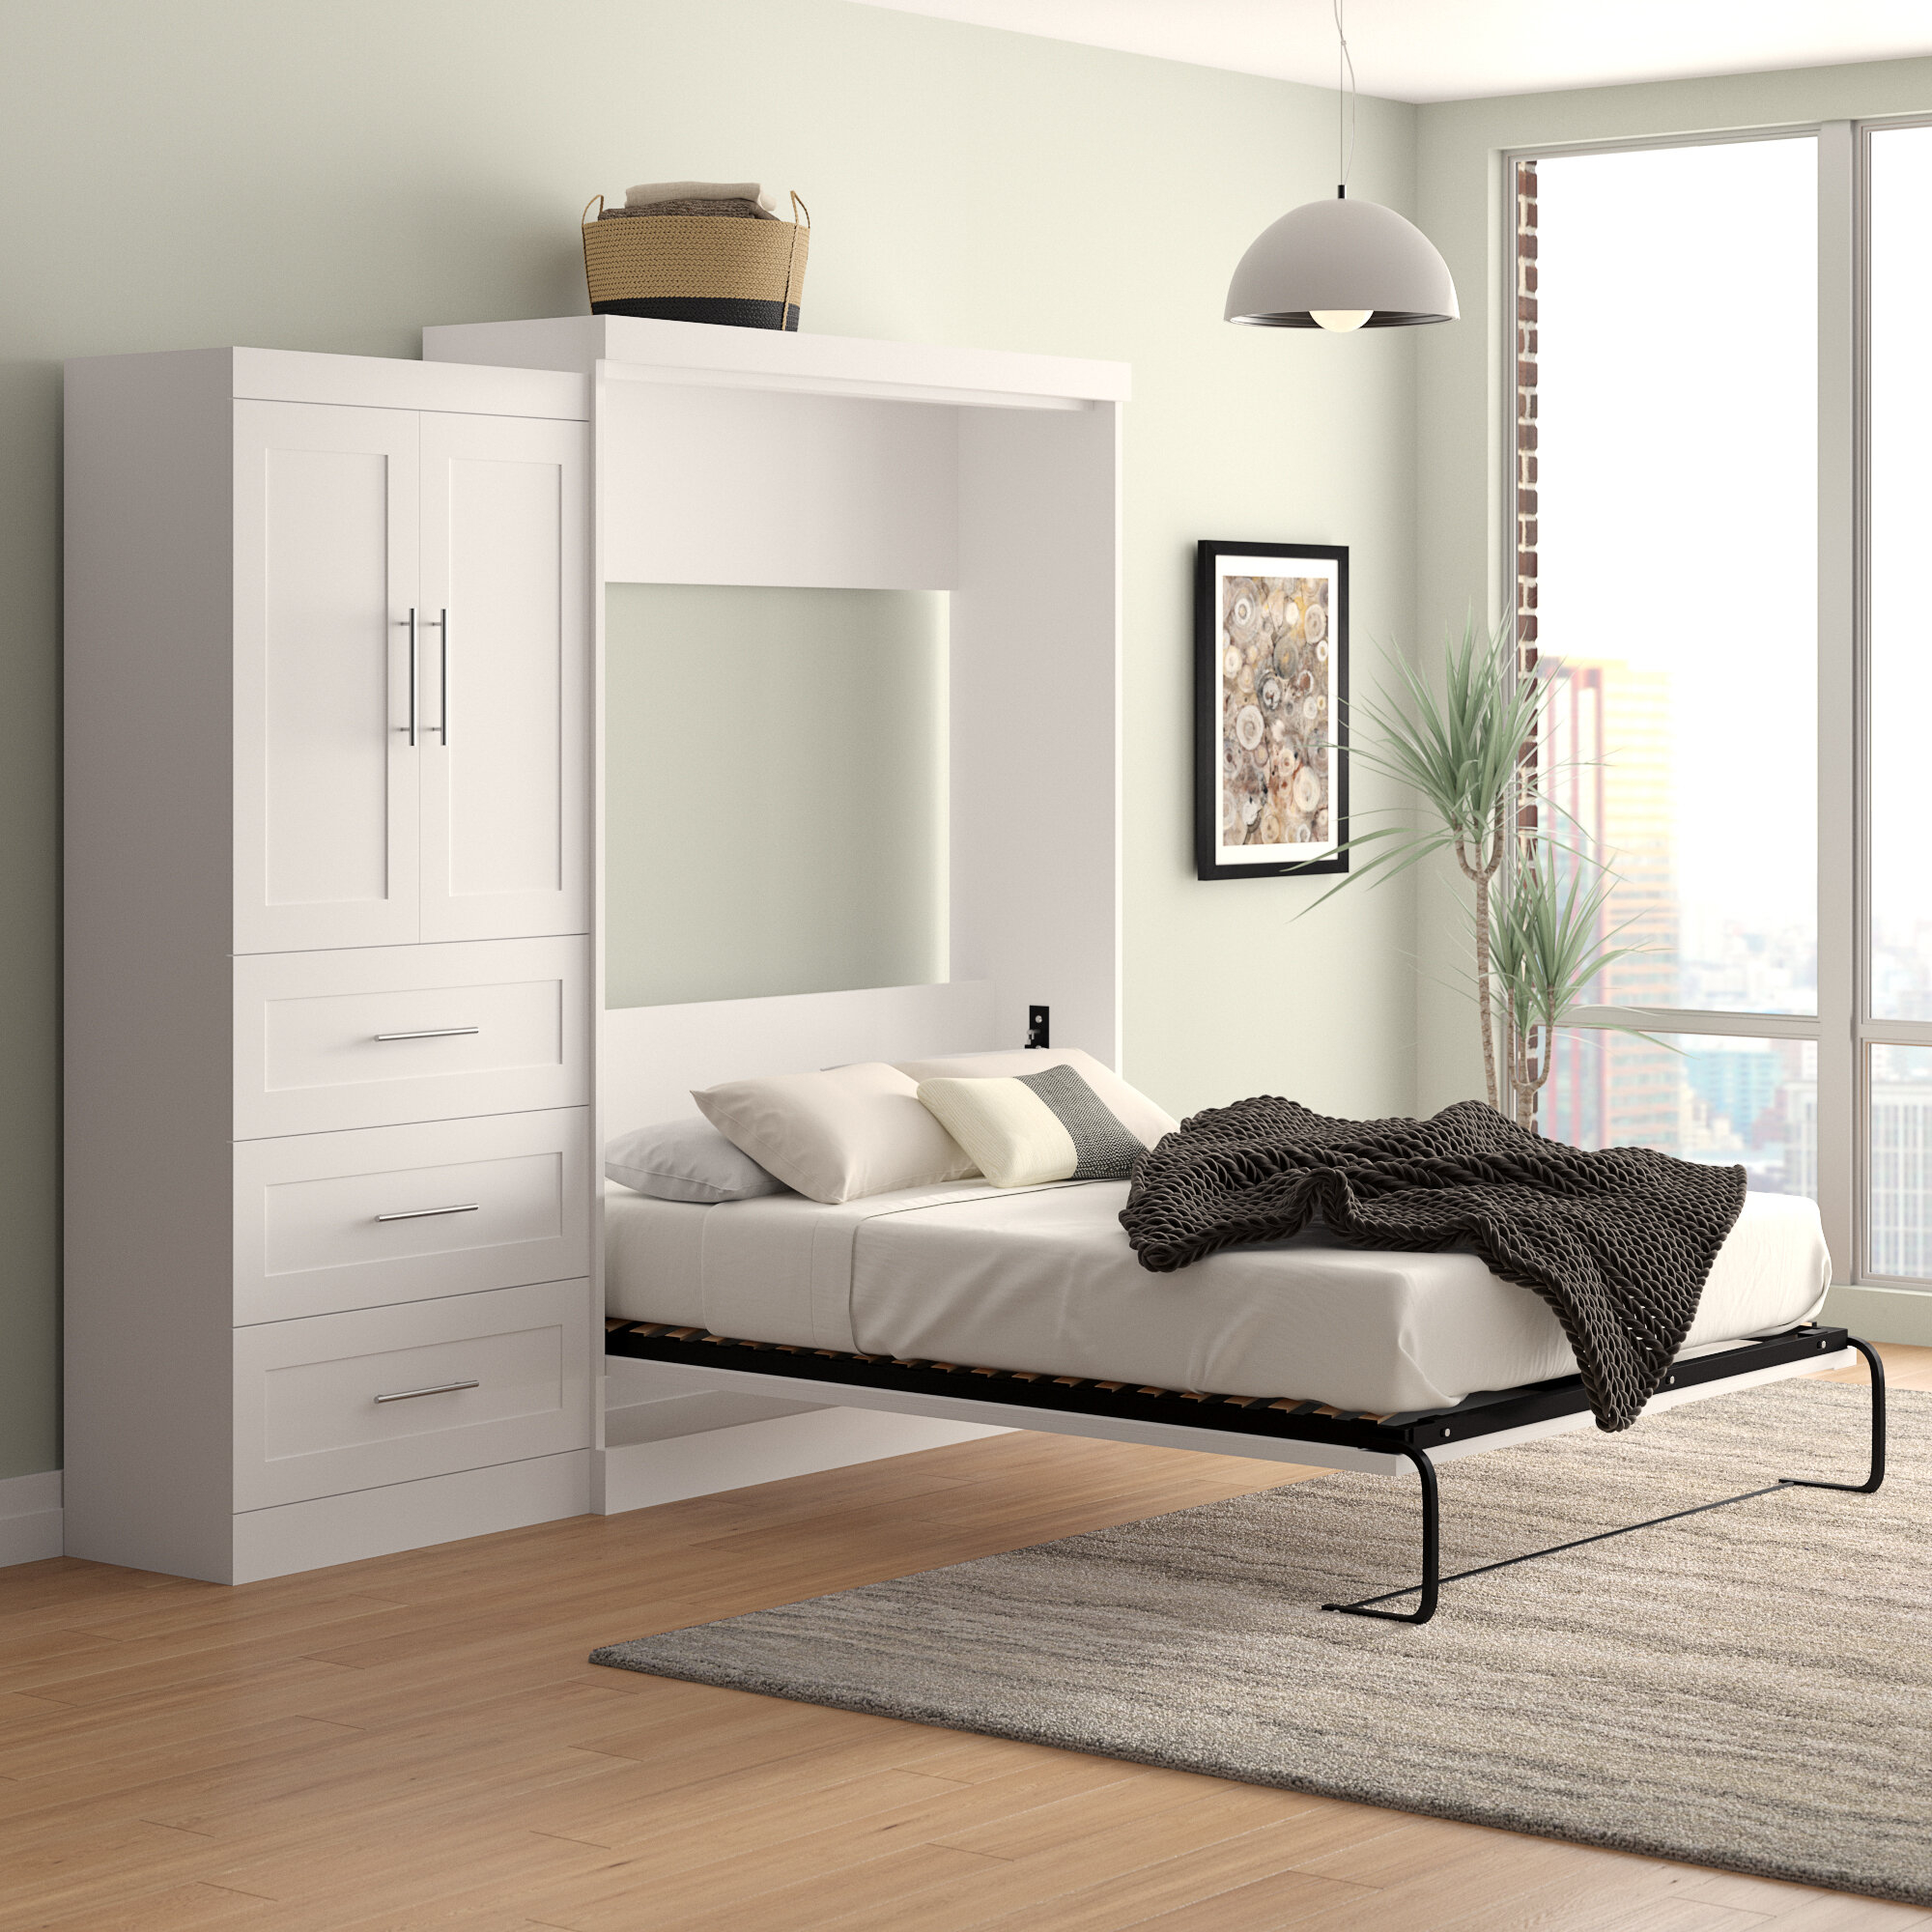 Modern Hideaway Bed for Small Space